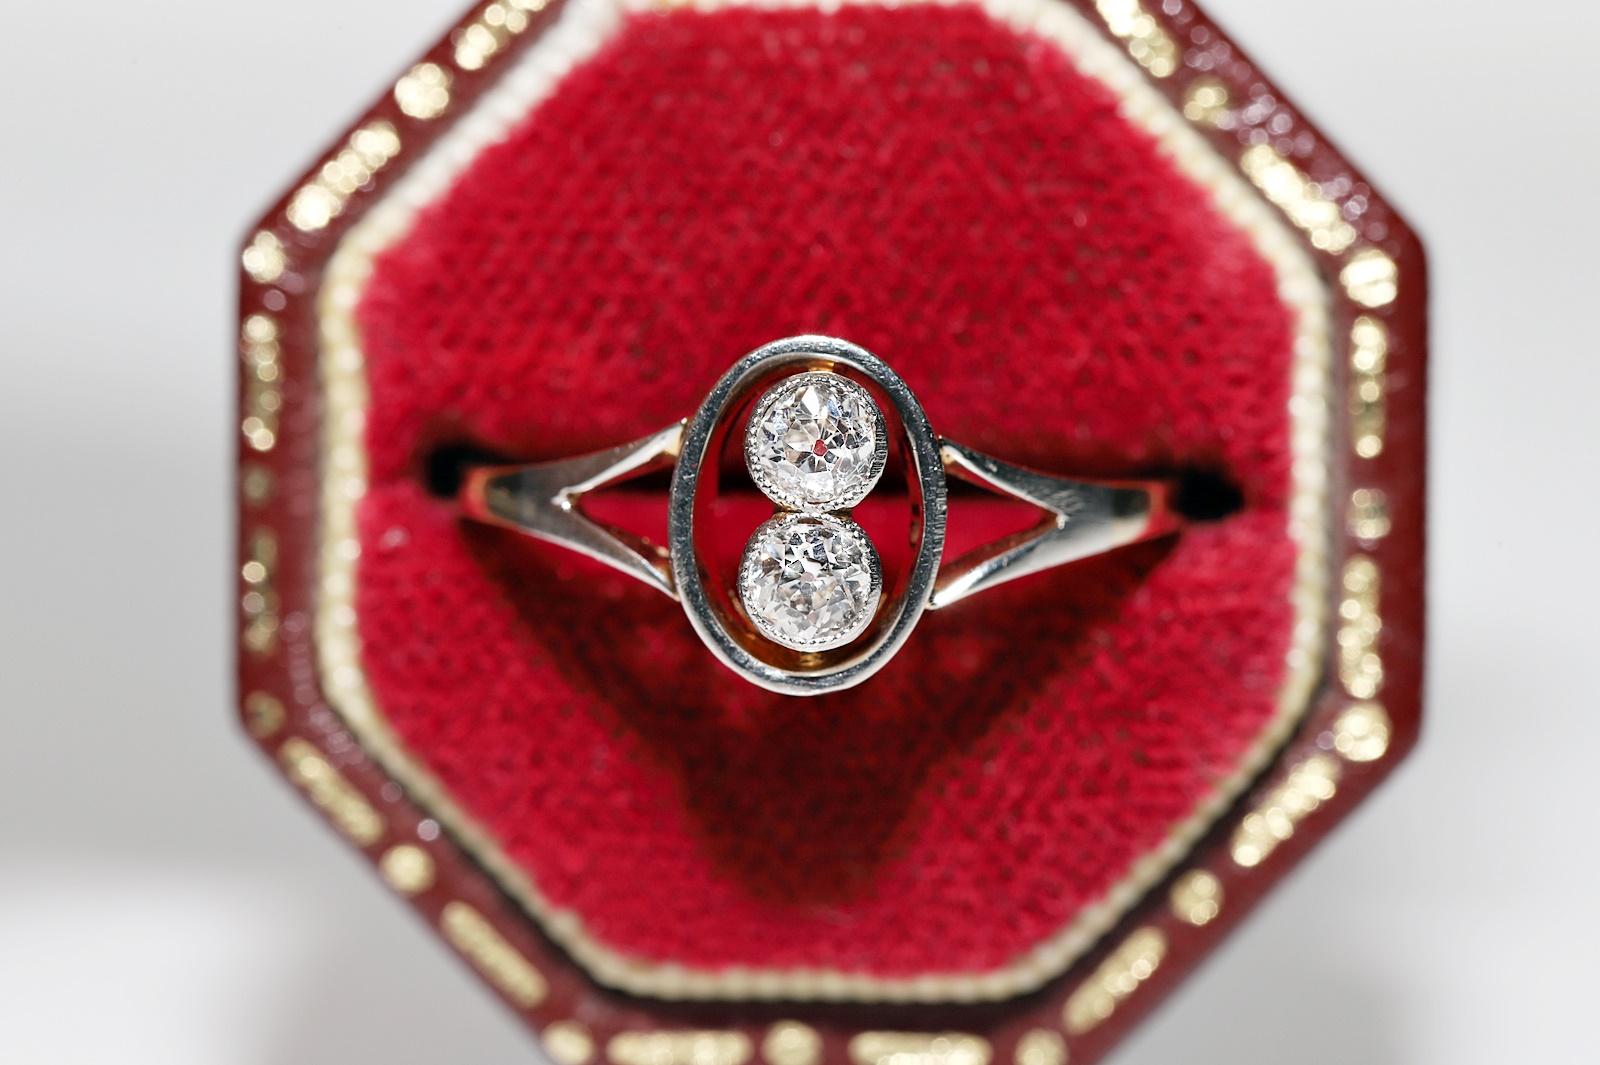 Antique Original ArtDeco Circa 1920s 14k Gold Natural Diamond Decorated Ring In Good Condition For Sale In Fatih/İstanbul, 34